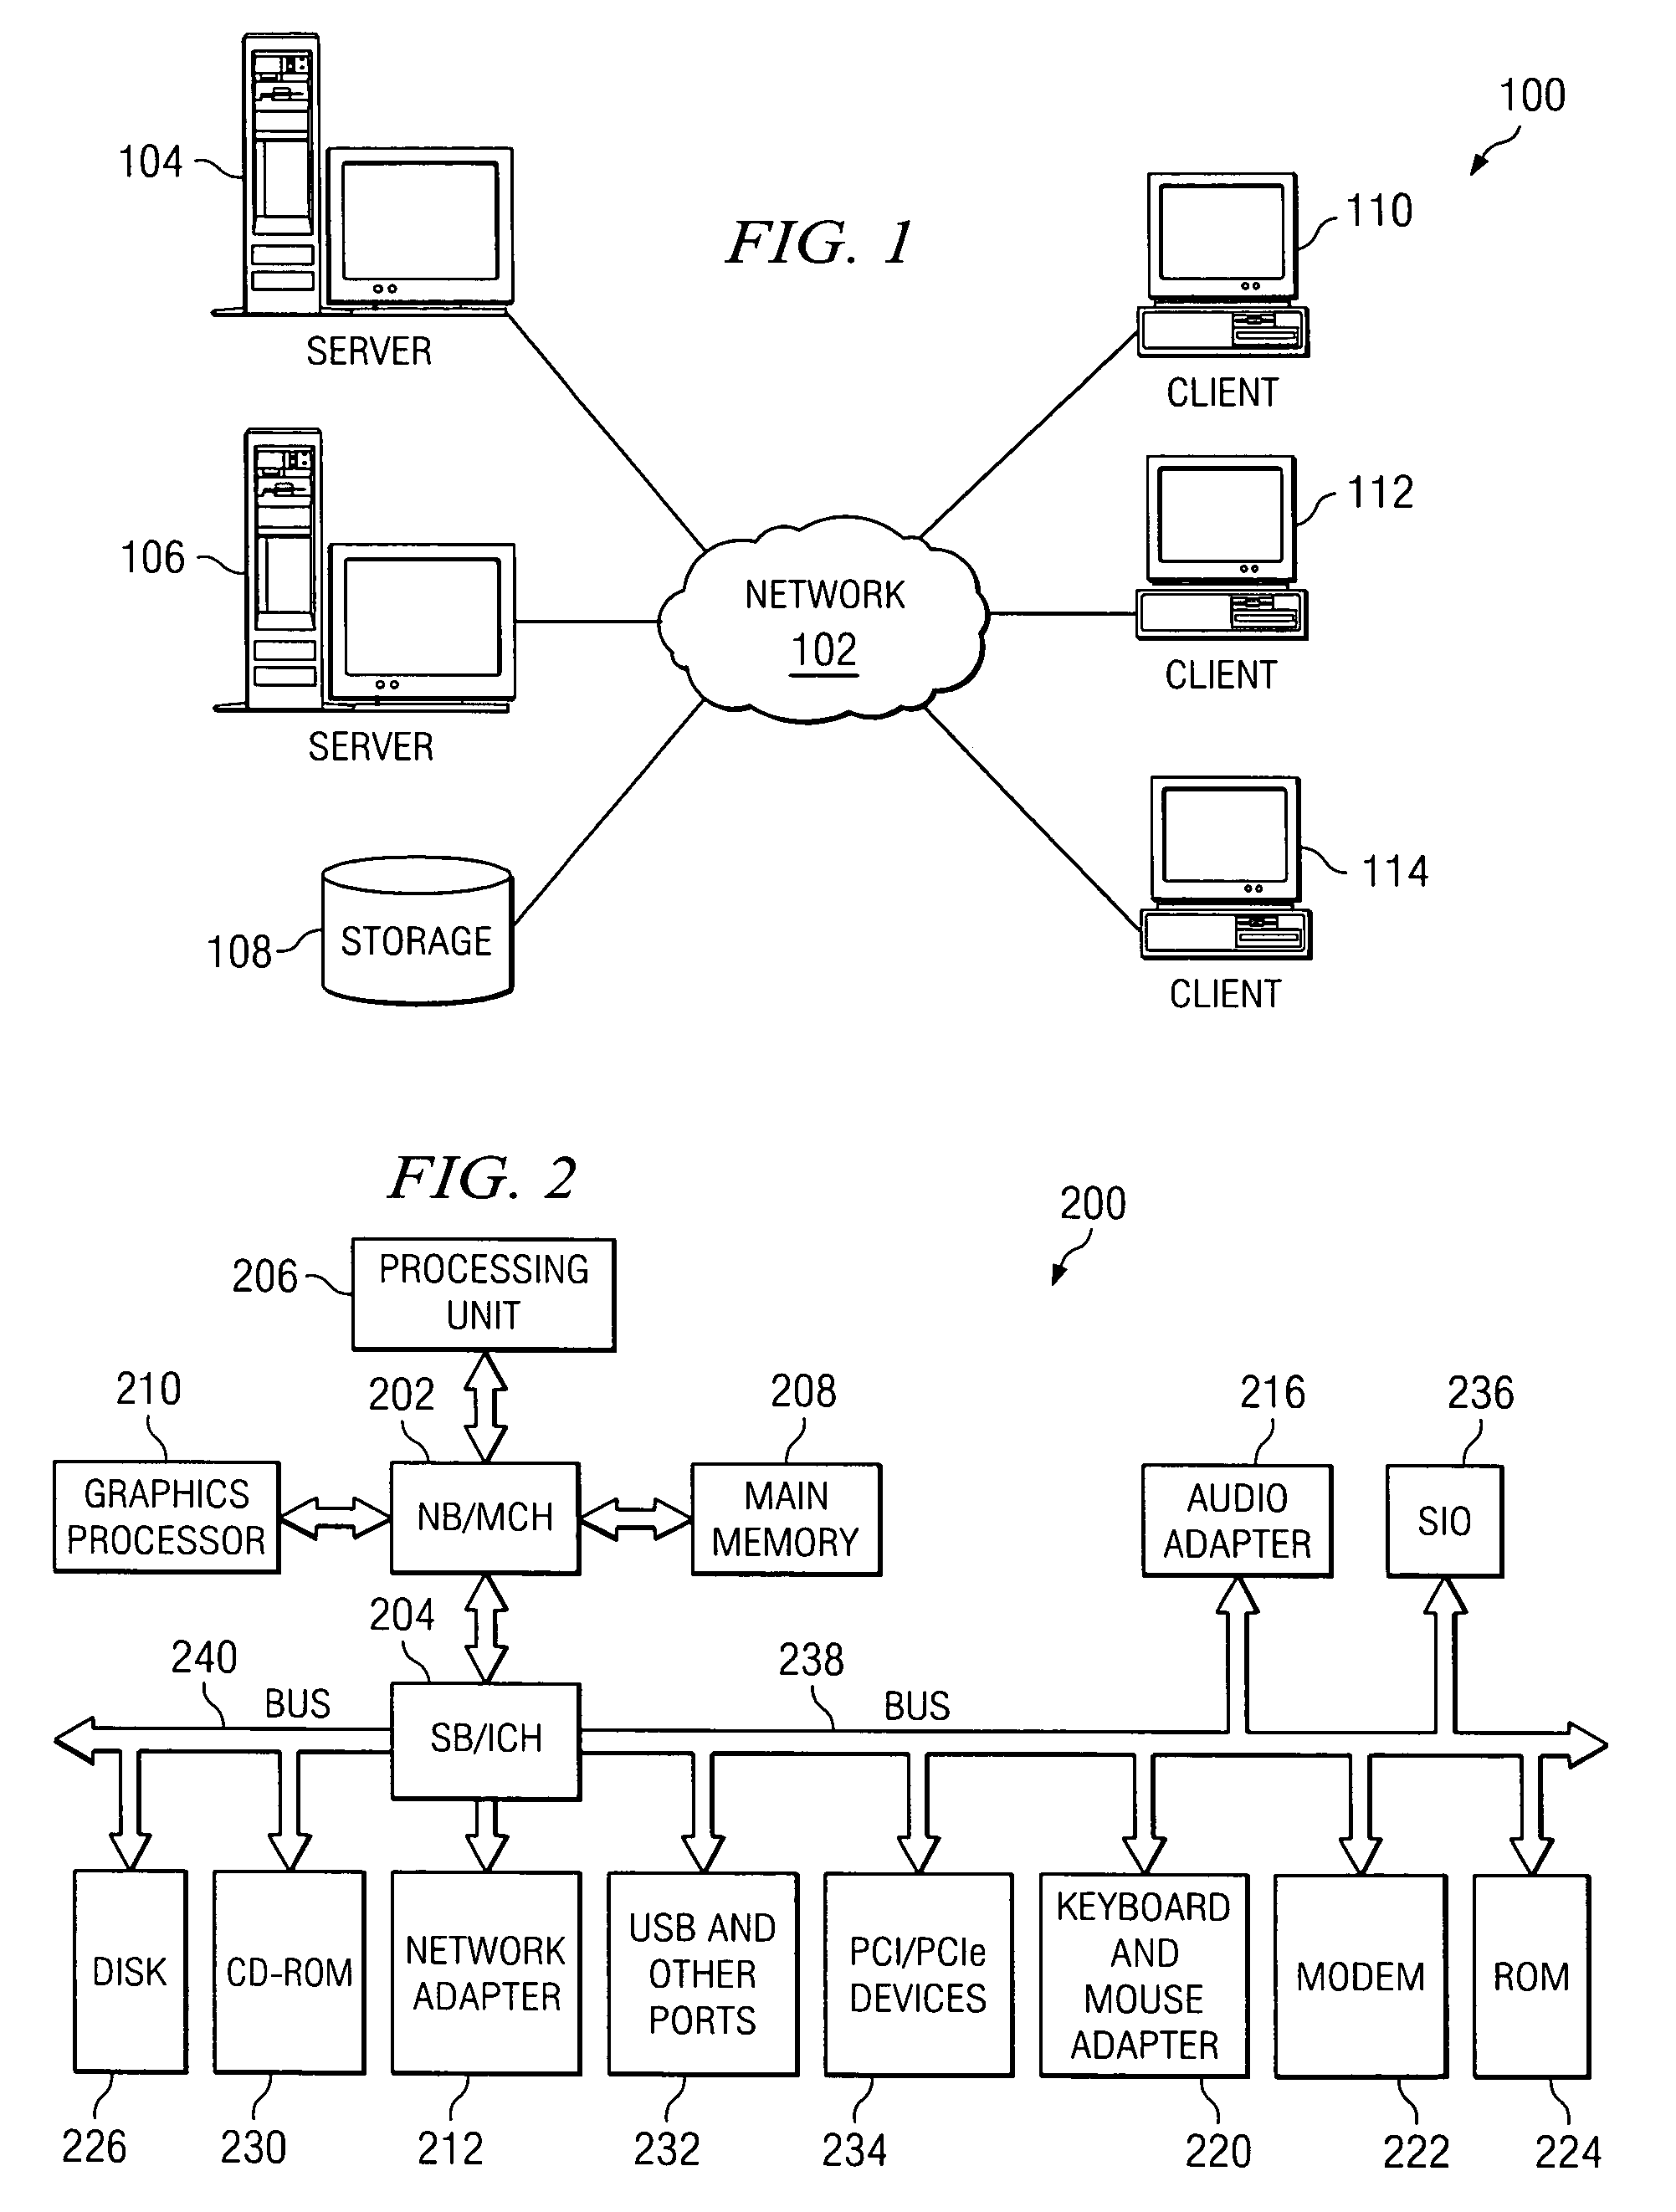 Generation of hardware thermal profiles for a set of processors